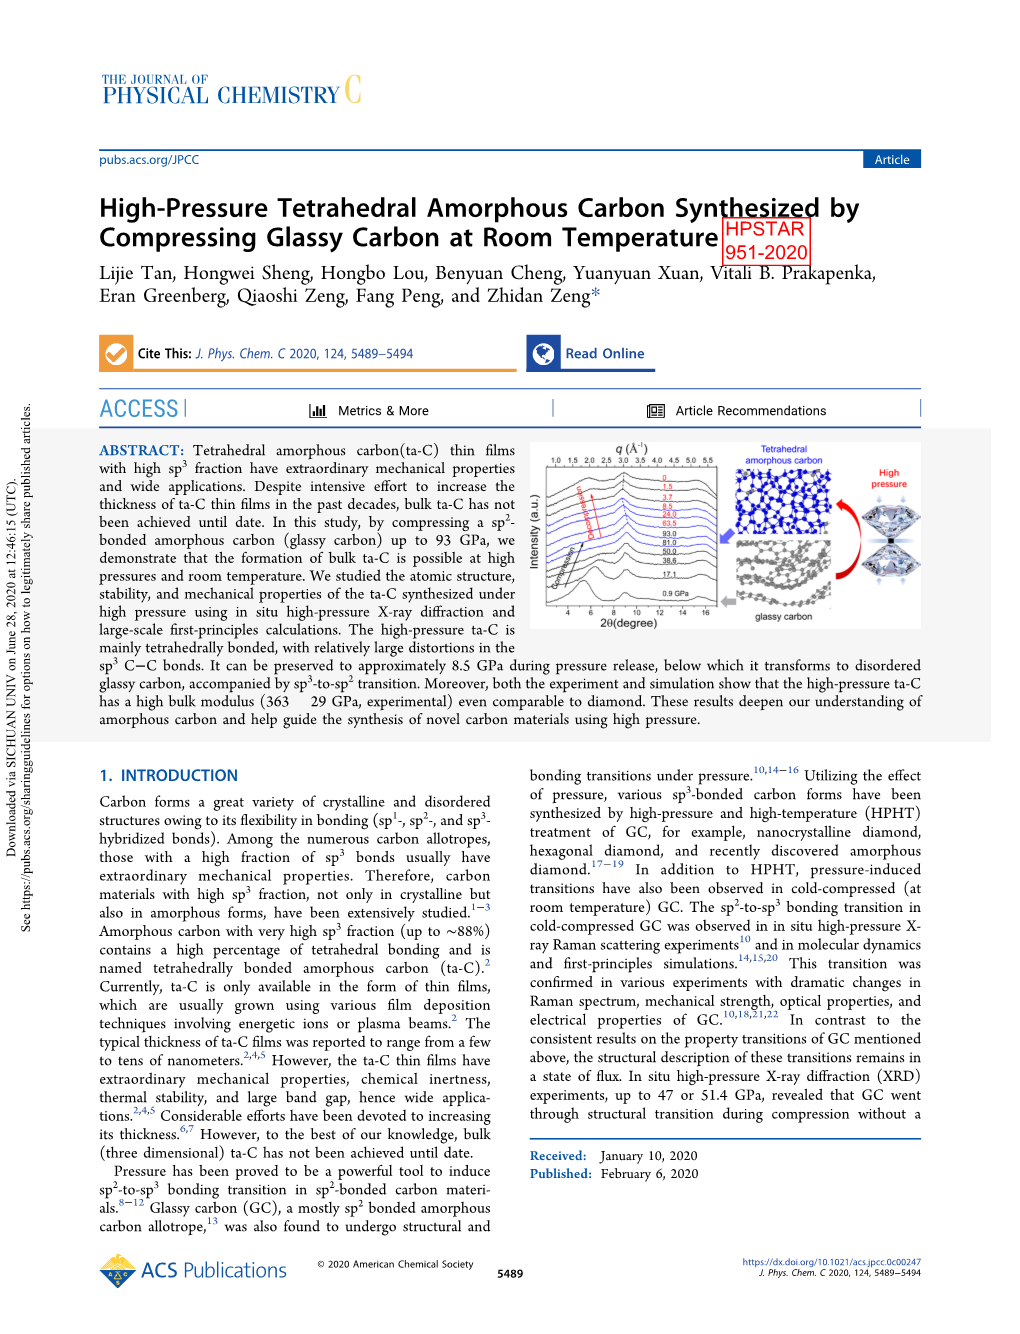 High-Pressure Tetrahedral Amorphous Carbon Synthesized By